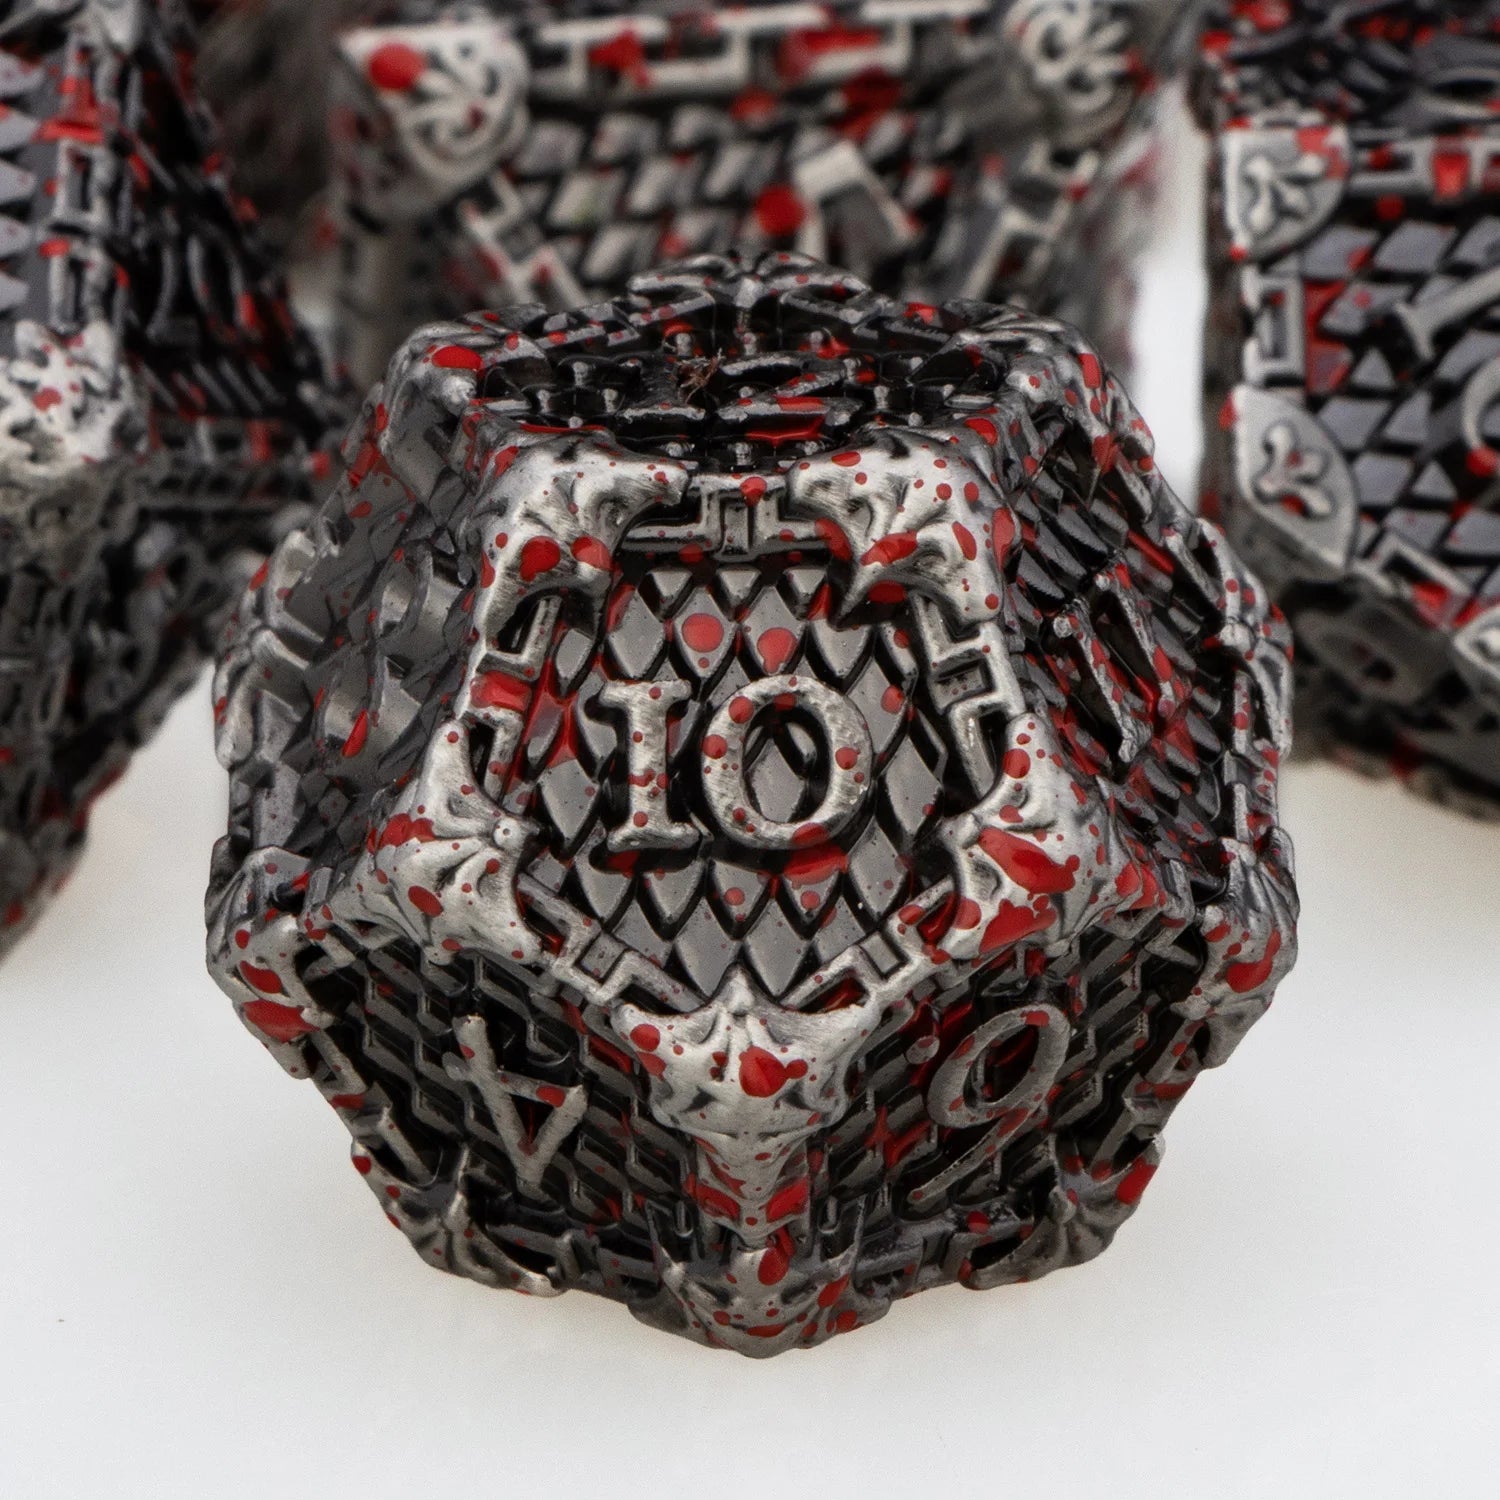 DND Metal Dice Set Dragon Scale Blood D&D Dice Dungeon and Dragon Role Playing Games Polyhedral Dice RPG D and D Dice